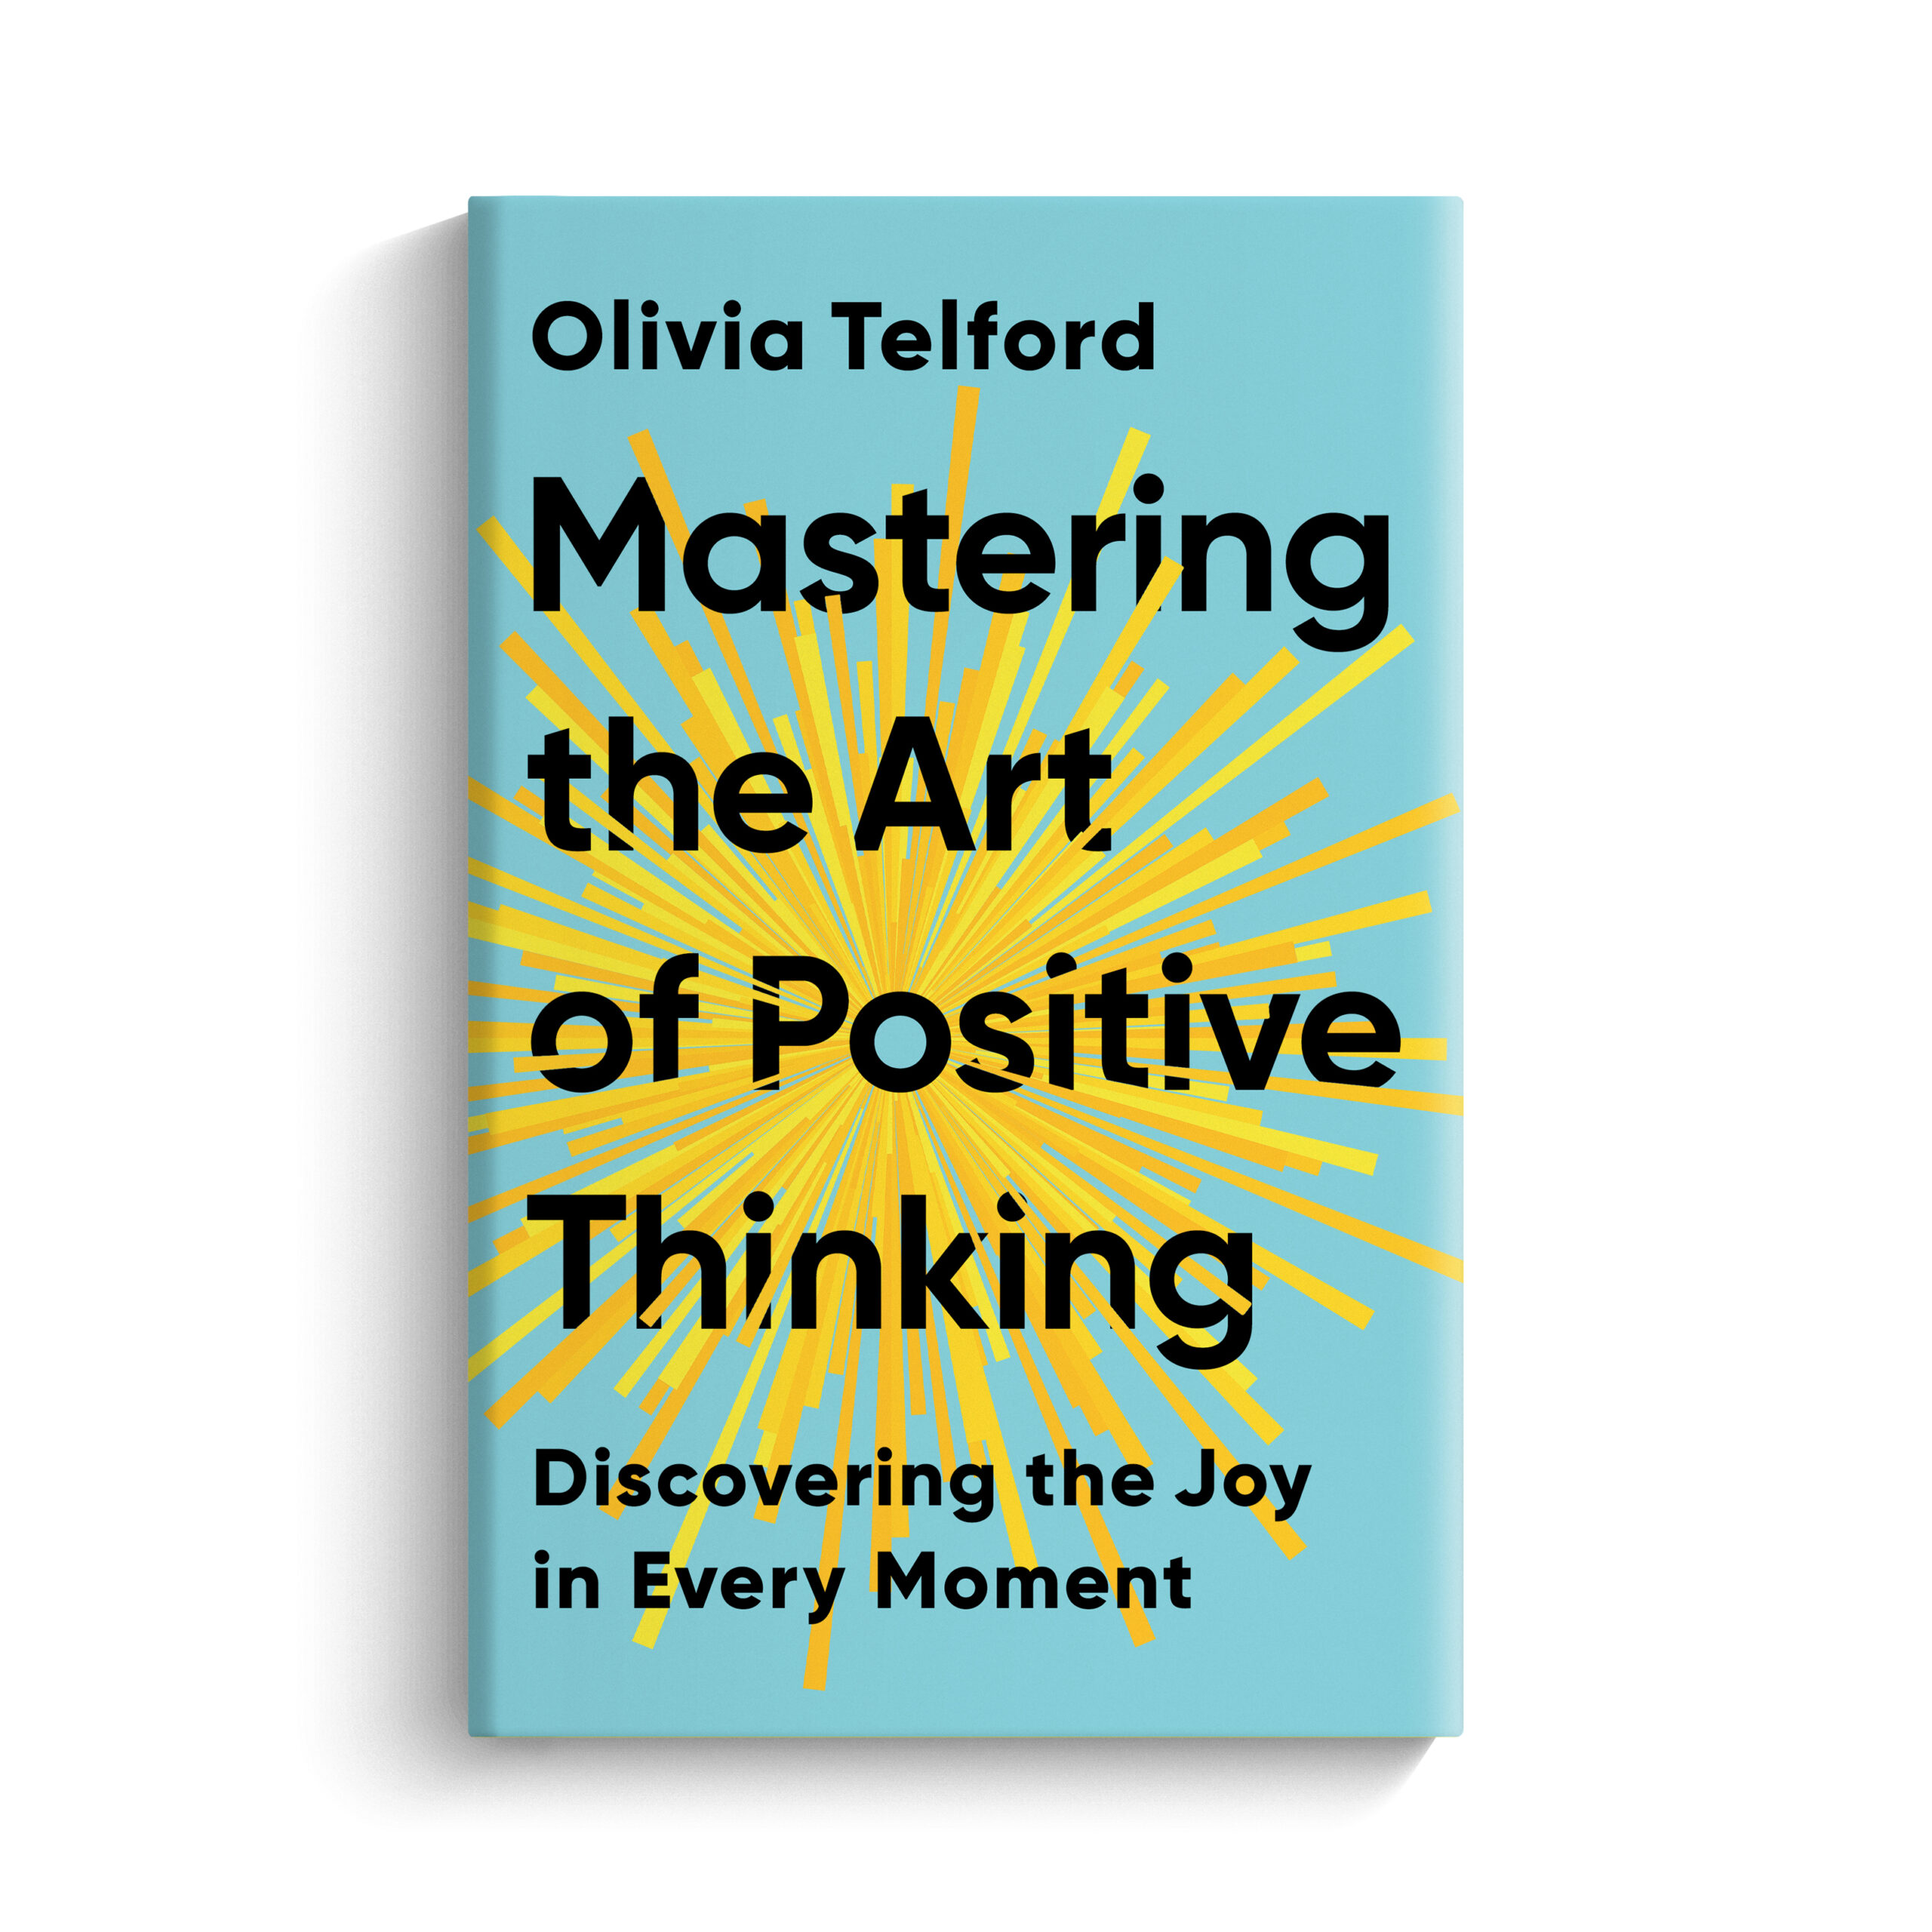 Mastering the Art of Positivity by Olivia Telford